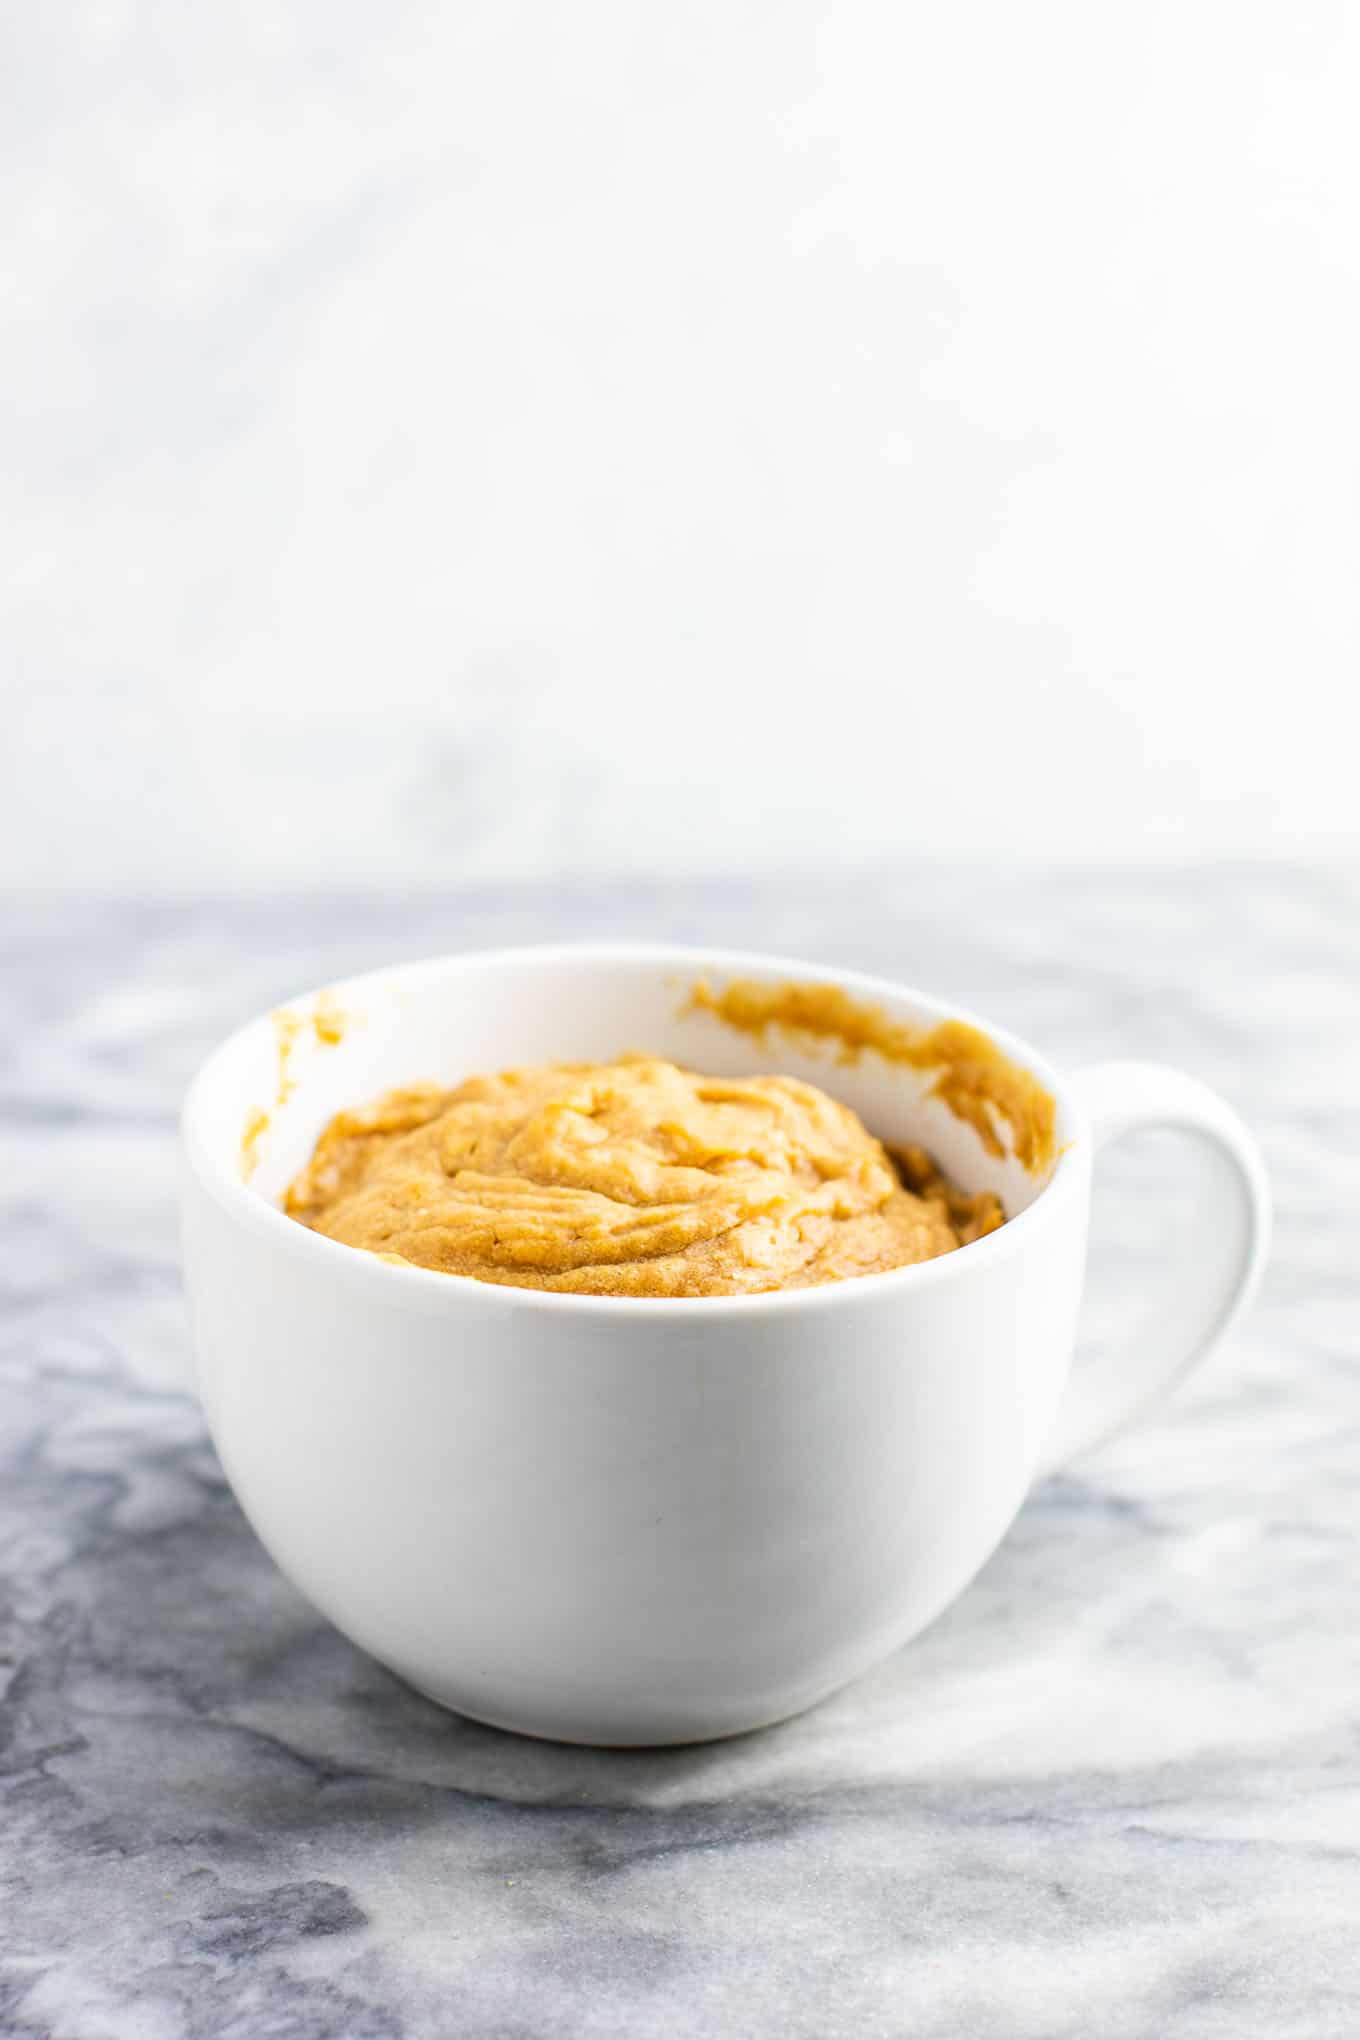 Microwave peanut butter cookie in a mug – gluten free dairy free, and refined sugar free! This tastes amazing and is so good with ice cream! #dessert #glutenfree #dairyfree #mugcake #peanutbuttercookie #peanutbuttermugcake